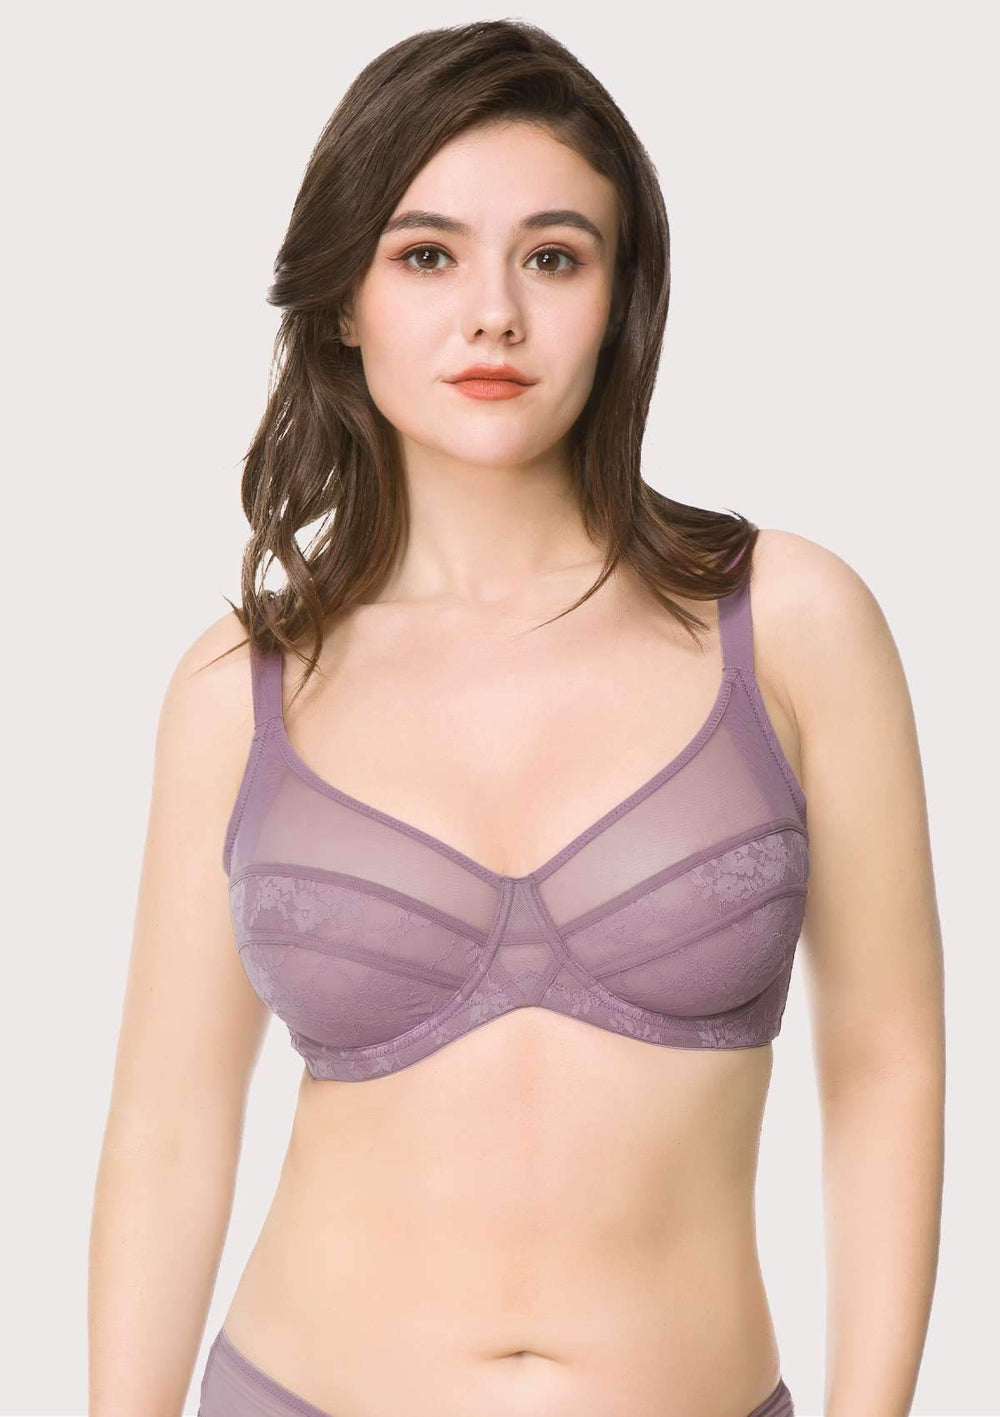 Lace Unlined Full Coverage Bra1130026:Cafe Mocha LBS 2365:34I